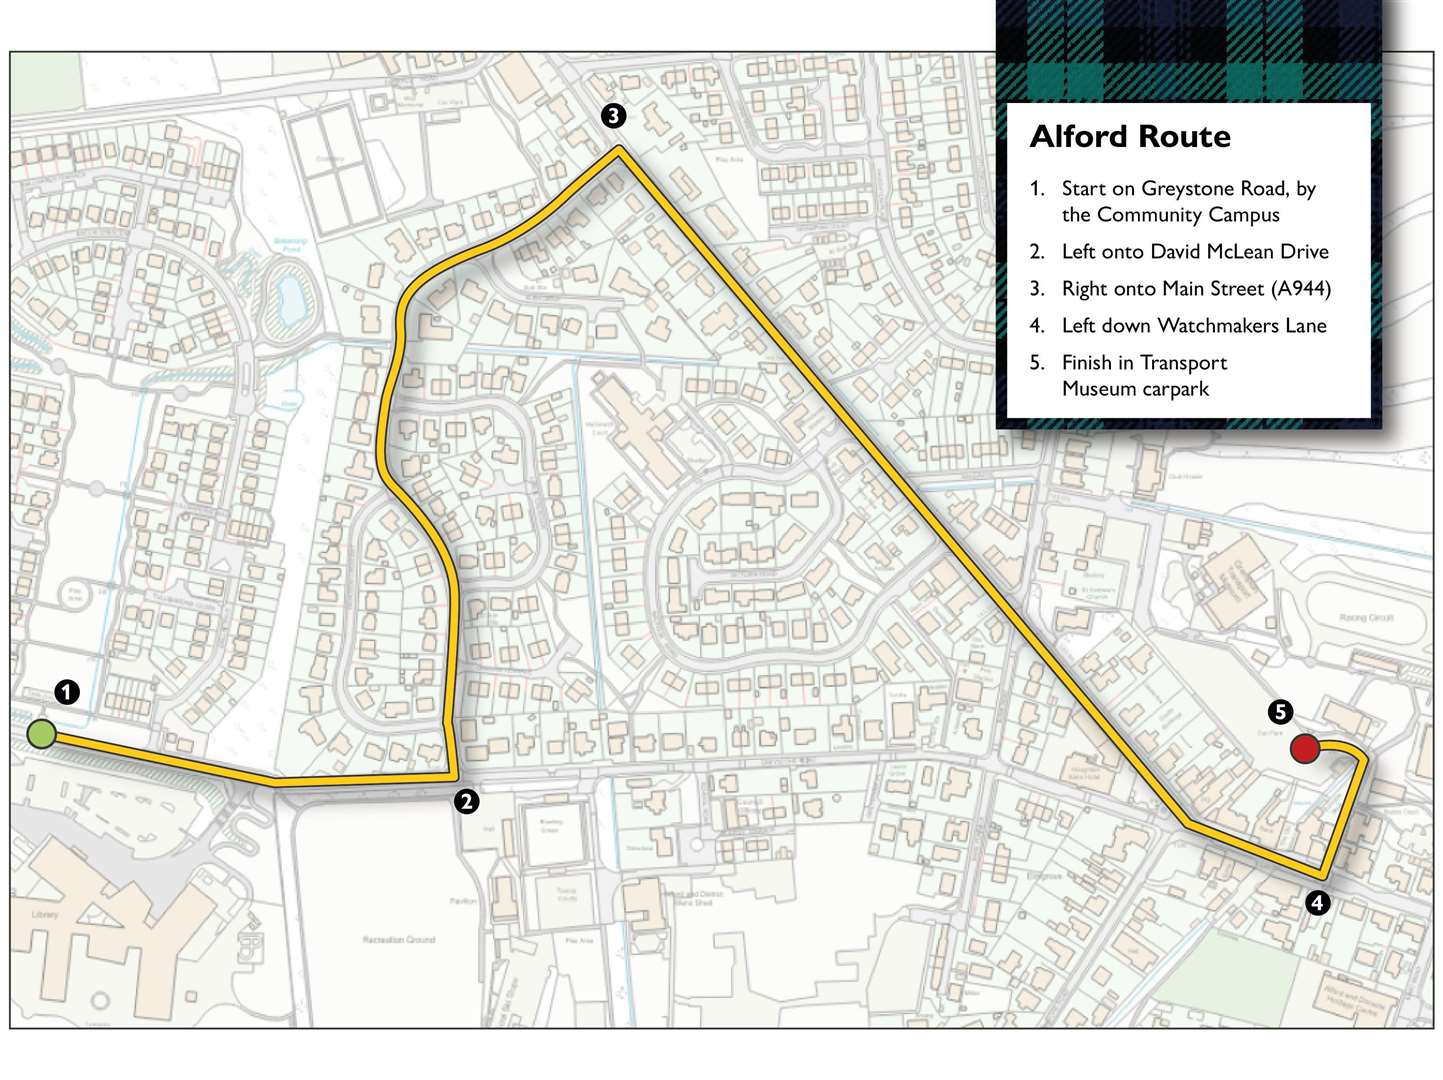 The Alford parade route.